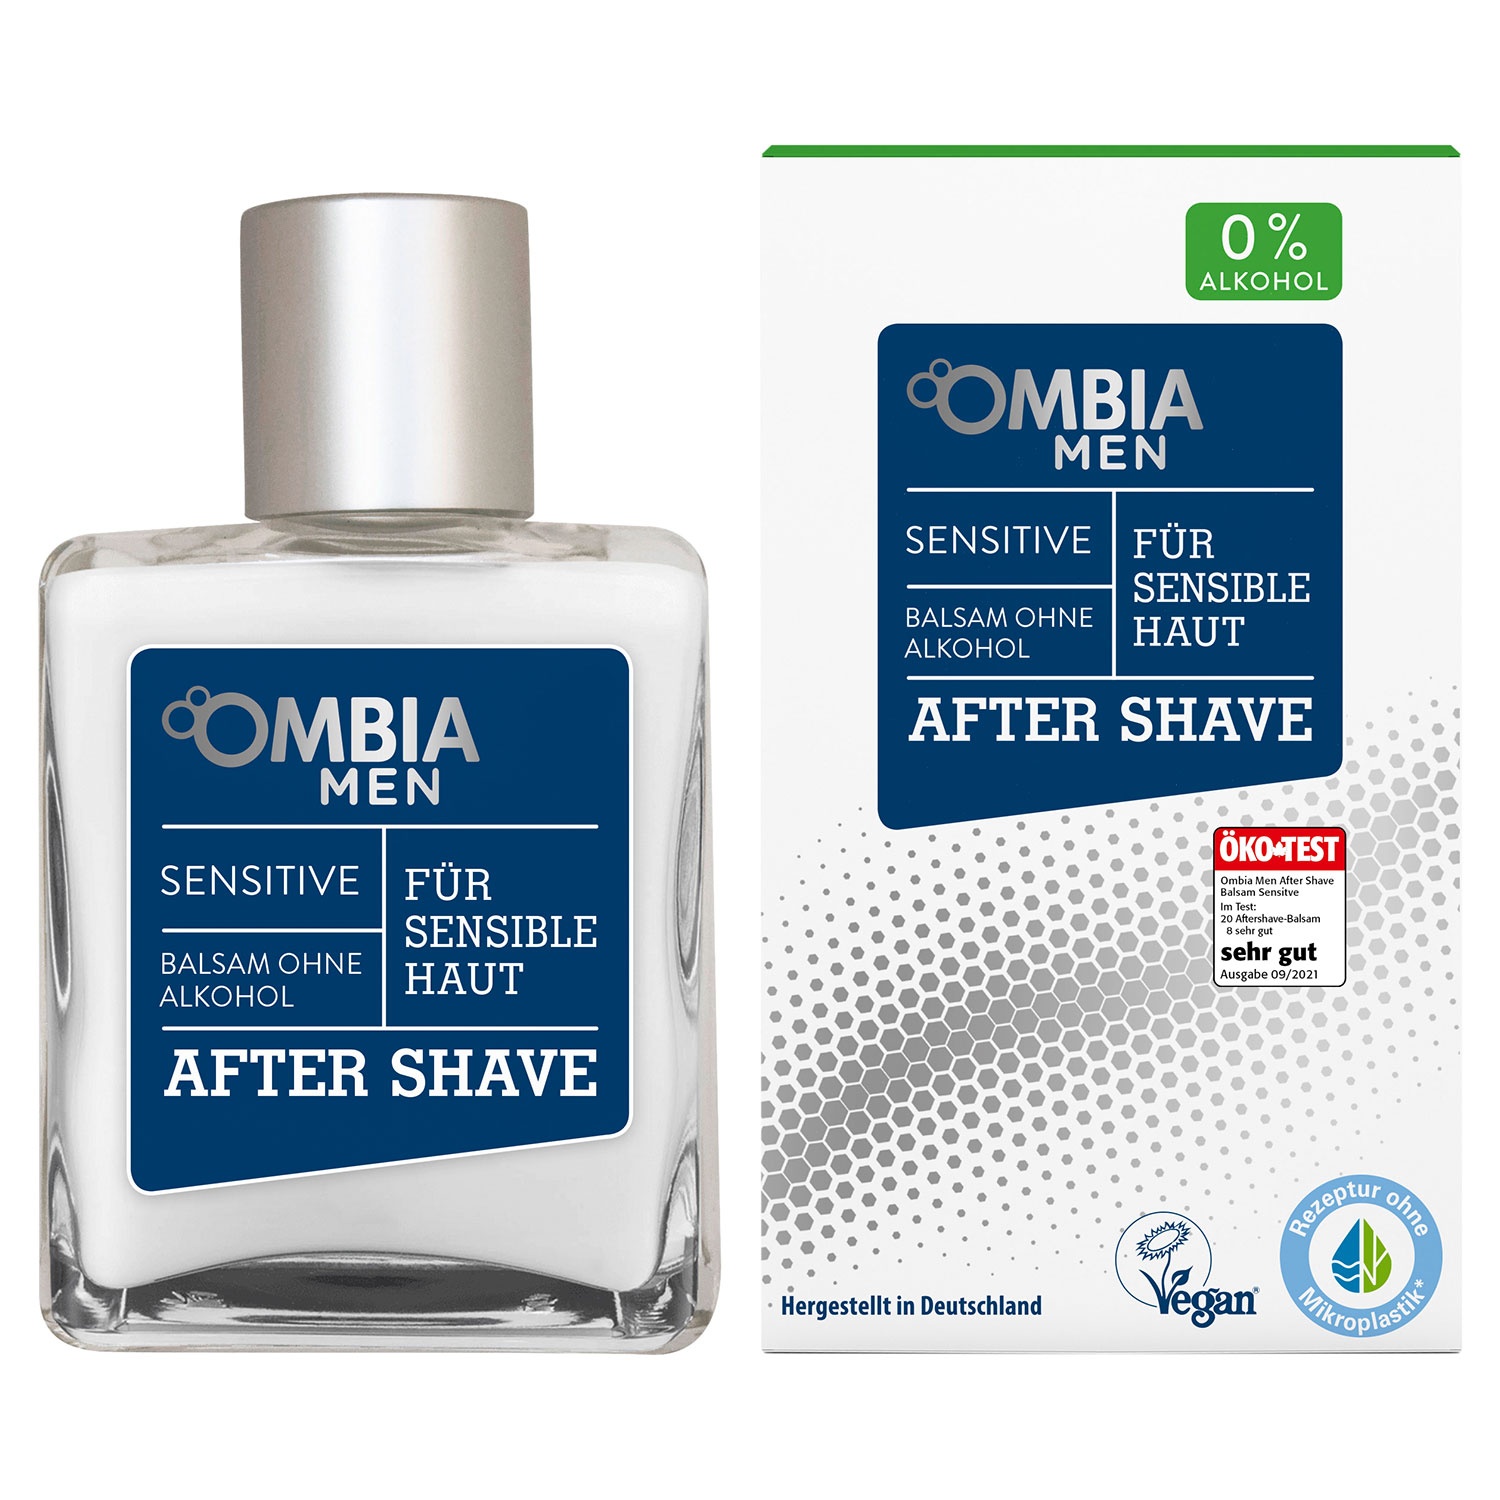 OMBIA MEN Aftershave 100 ml